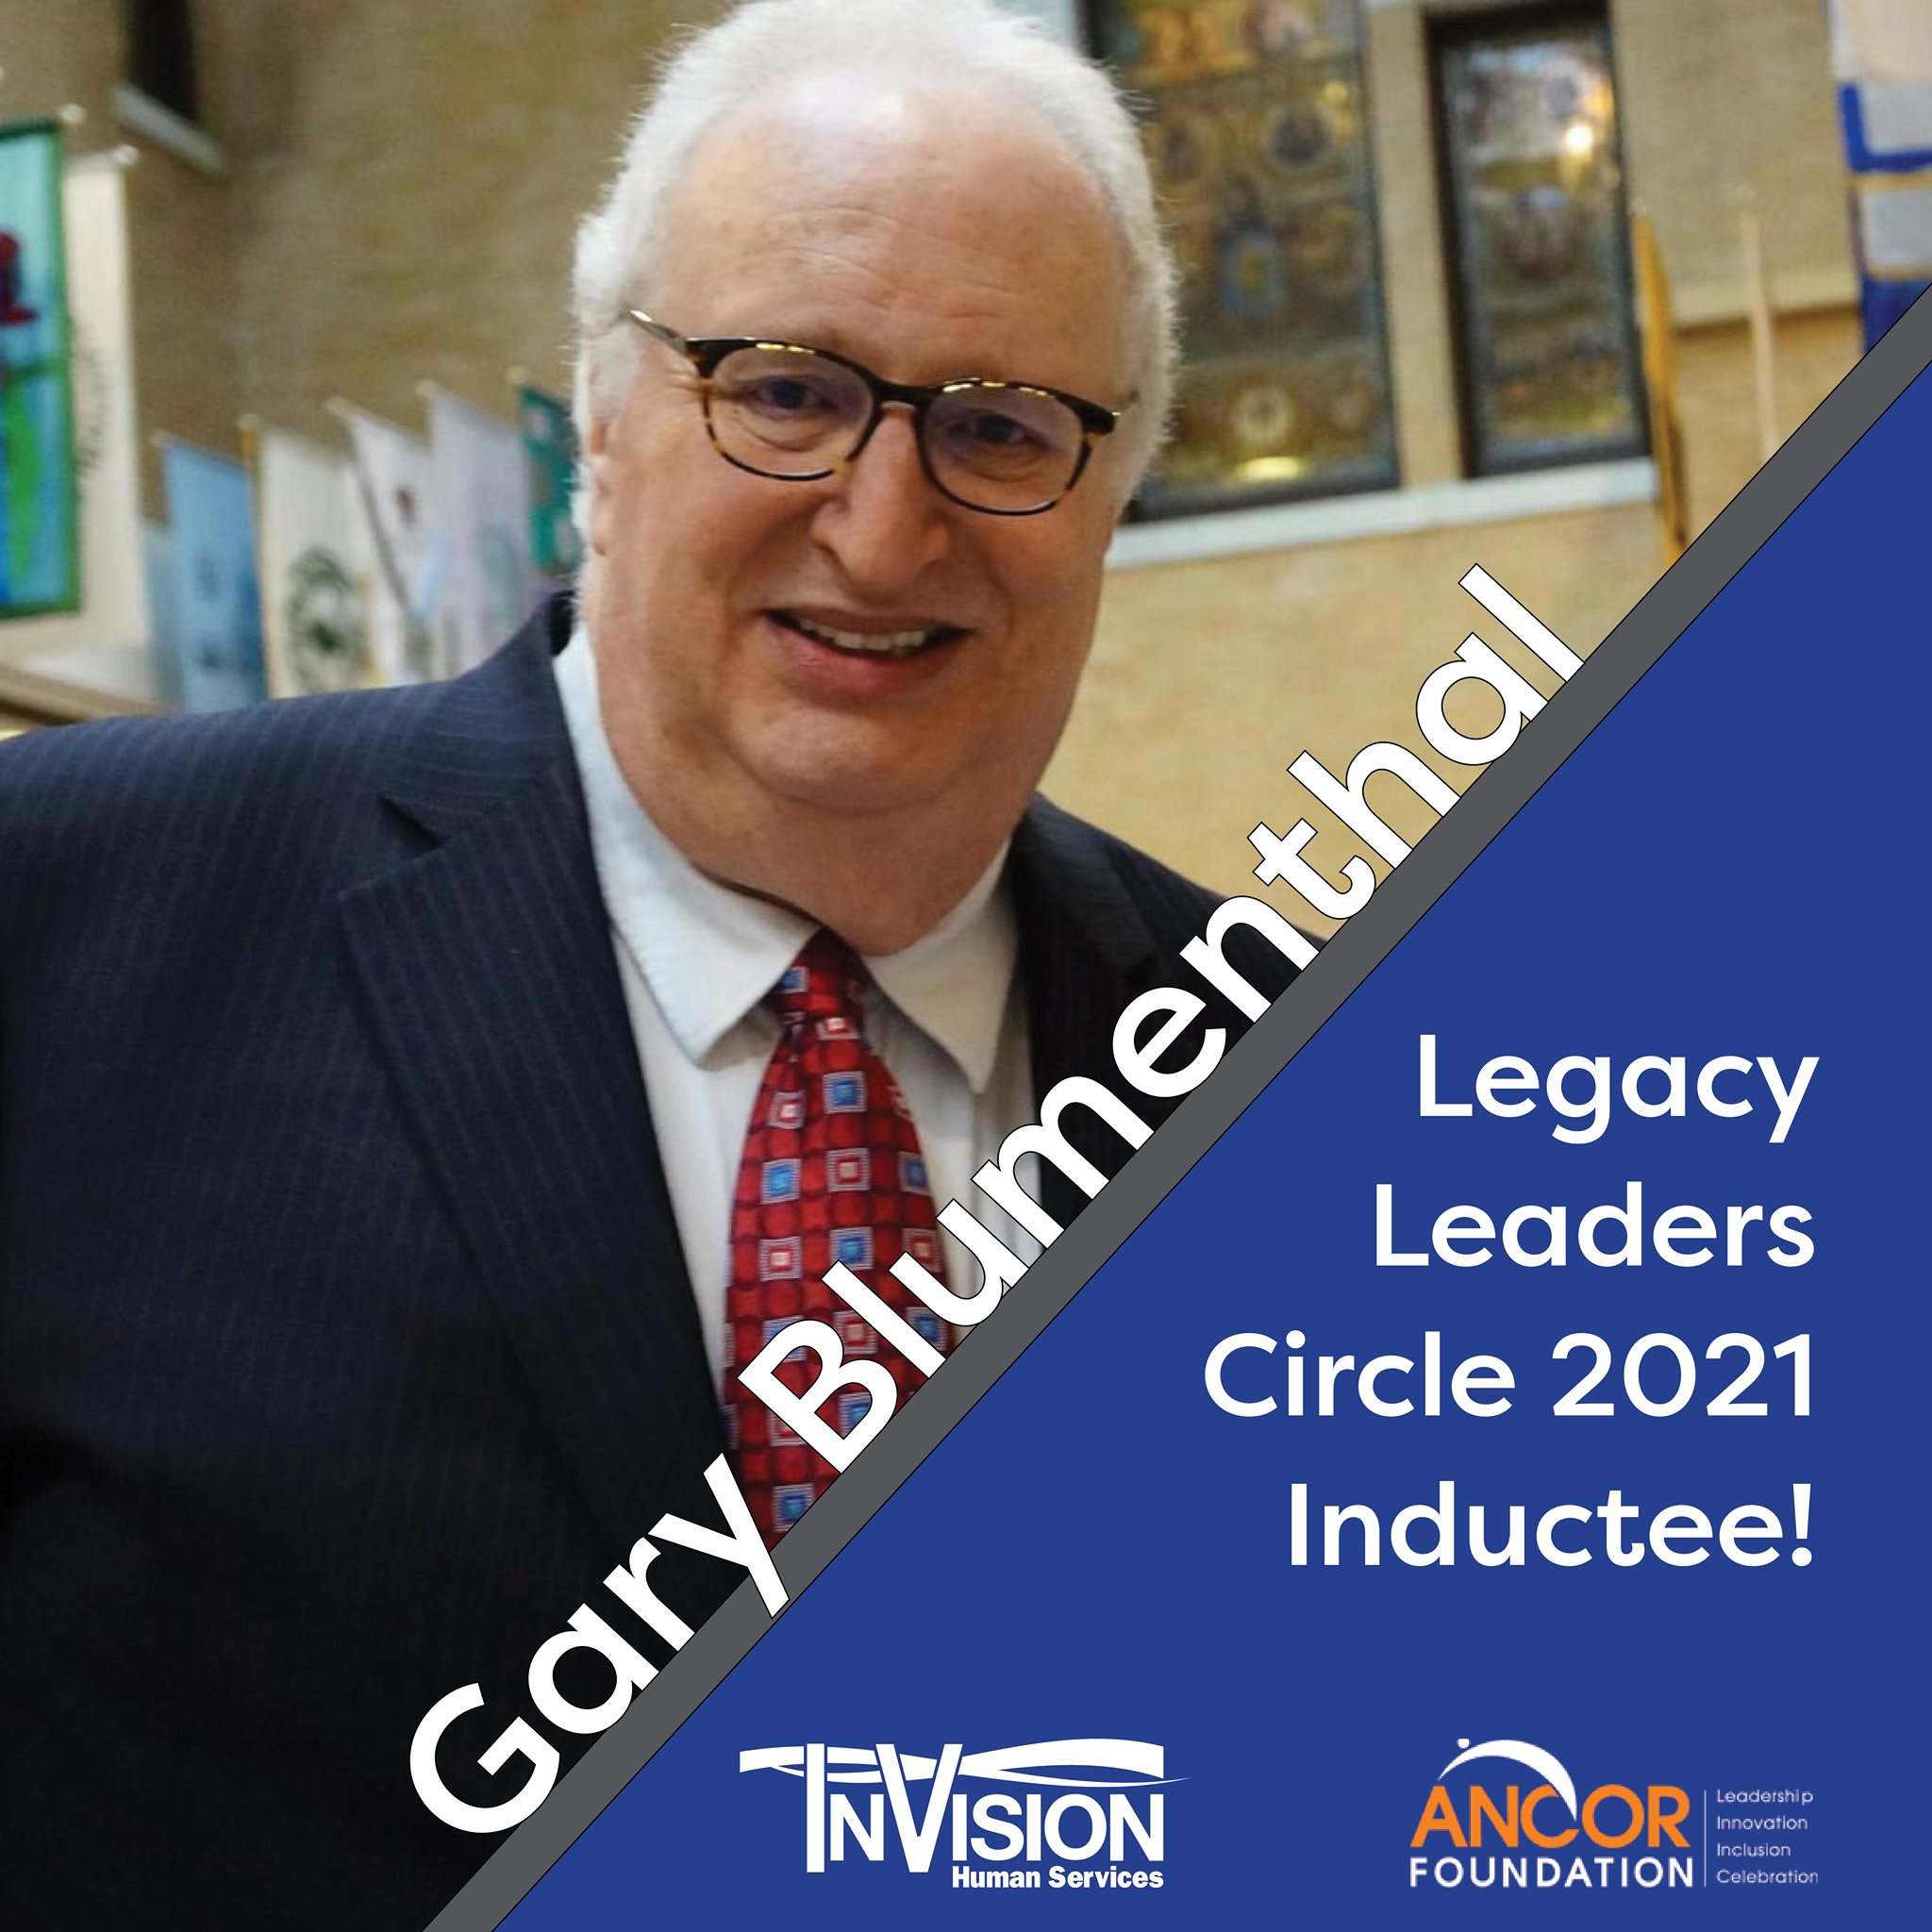 Gary Blumenthal Inducted into ANCOR Foundation Legacy Leaders Circle